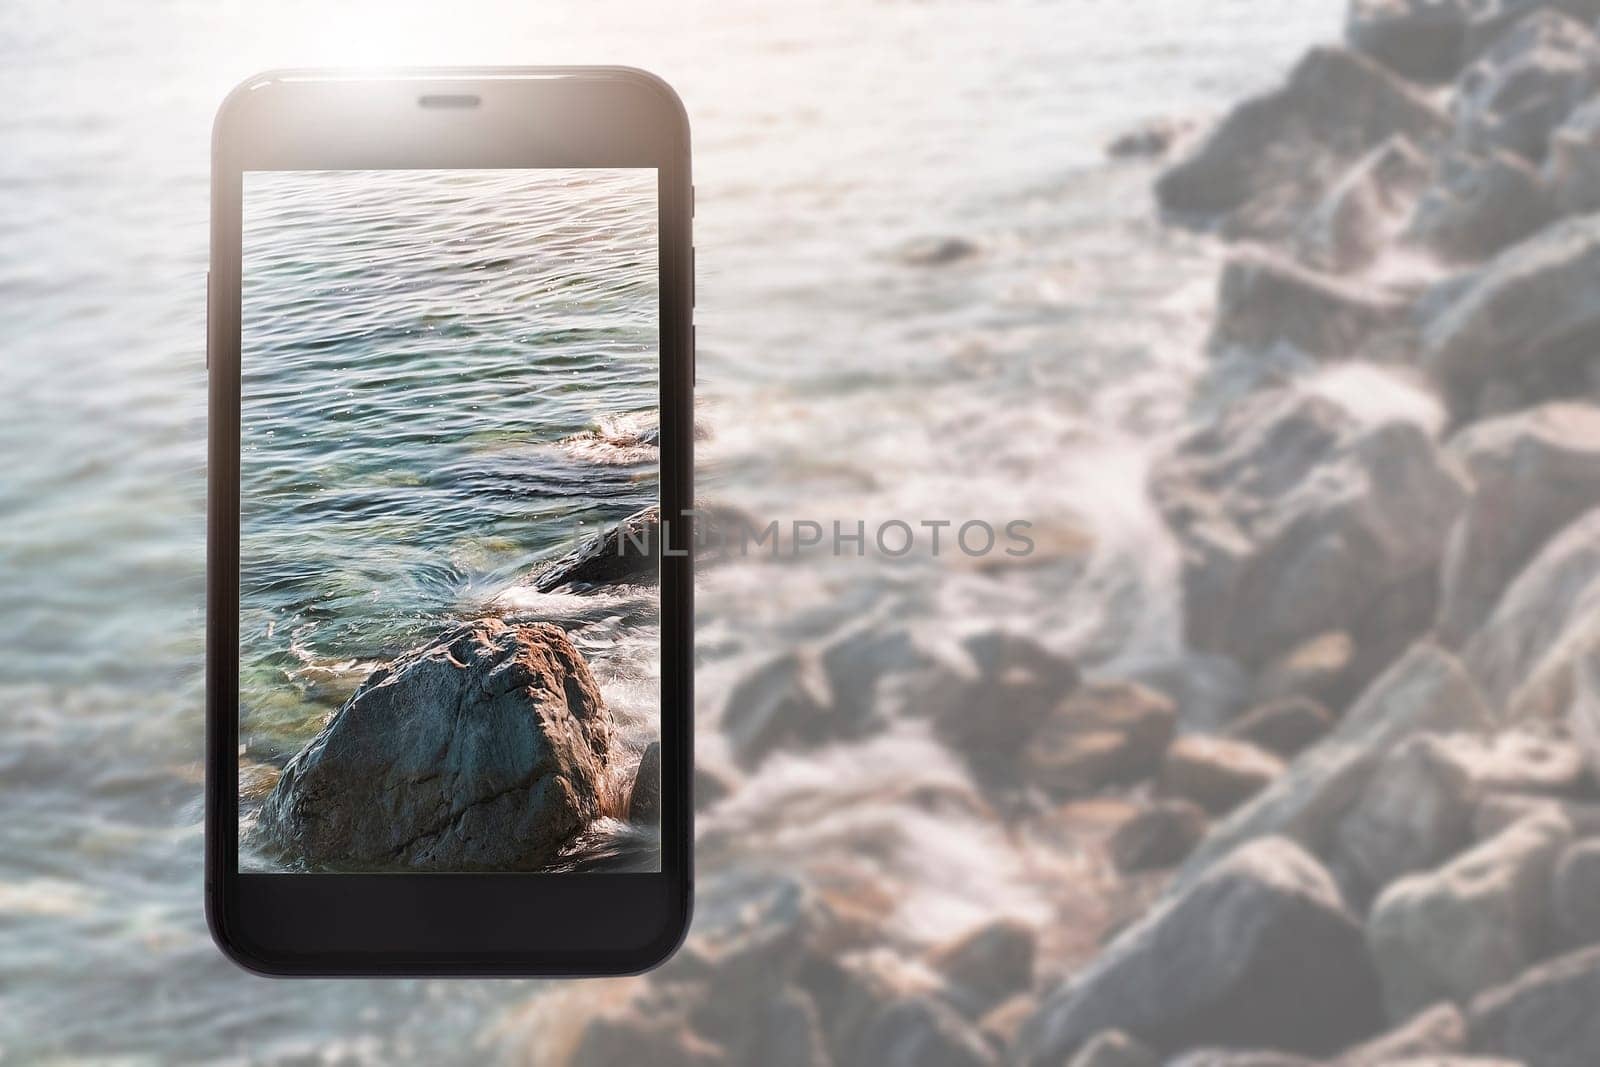 Phone layout on background of clear waters and a rocky beach.